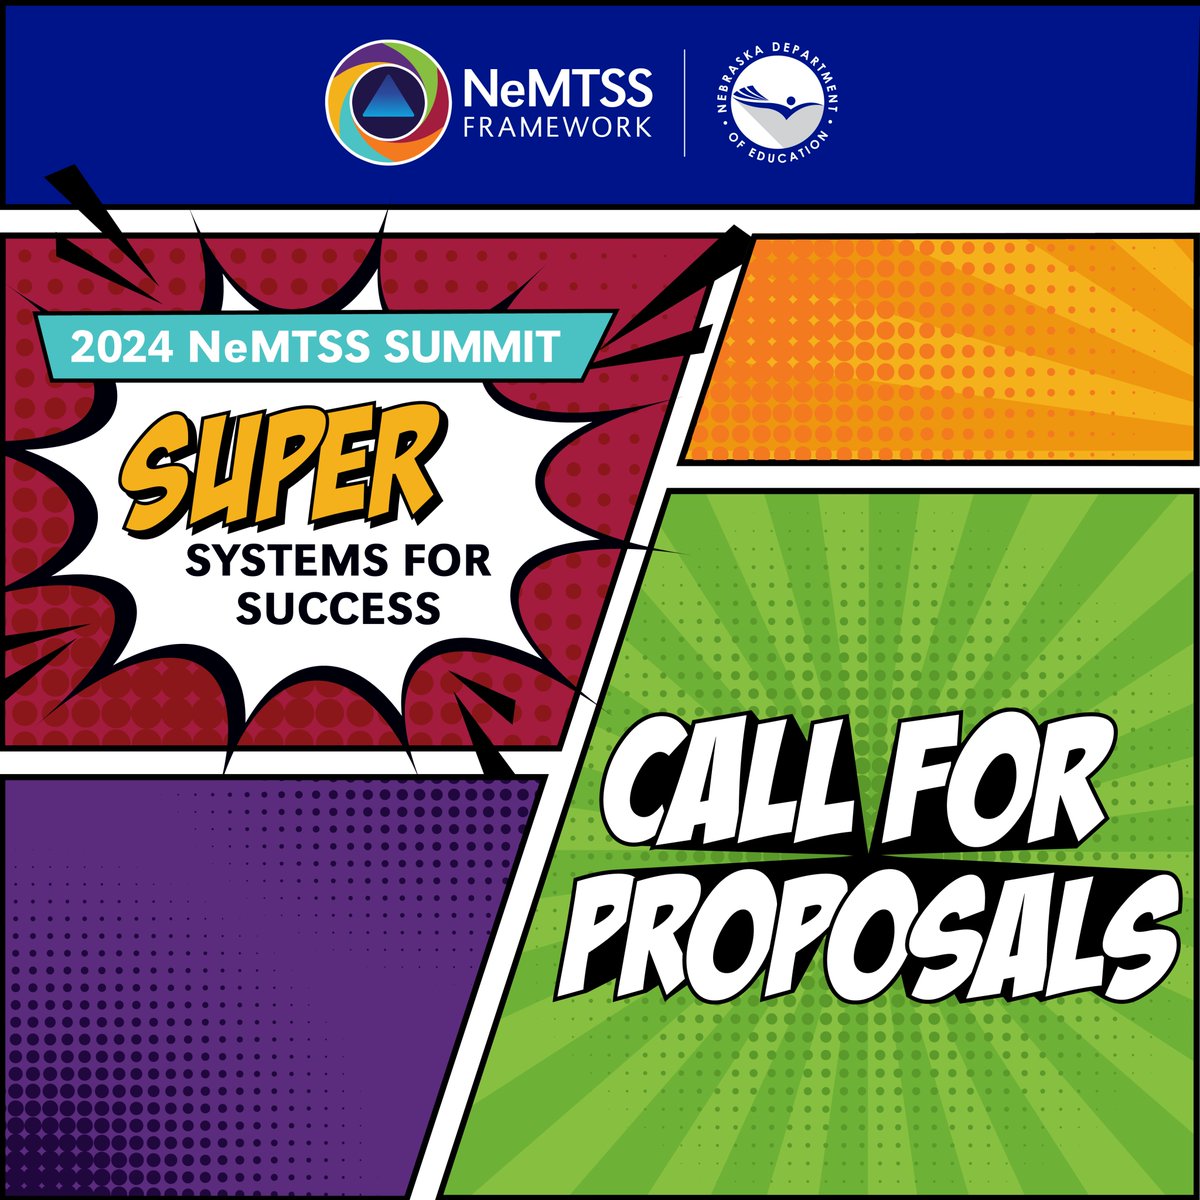 💥Last call for #NeMTSS24 proposals! 💥 For full consideration, please submit your proposal by Monday, April 1. Find all the details on our blog! ›› bit.ly/nemtss24